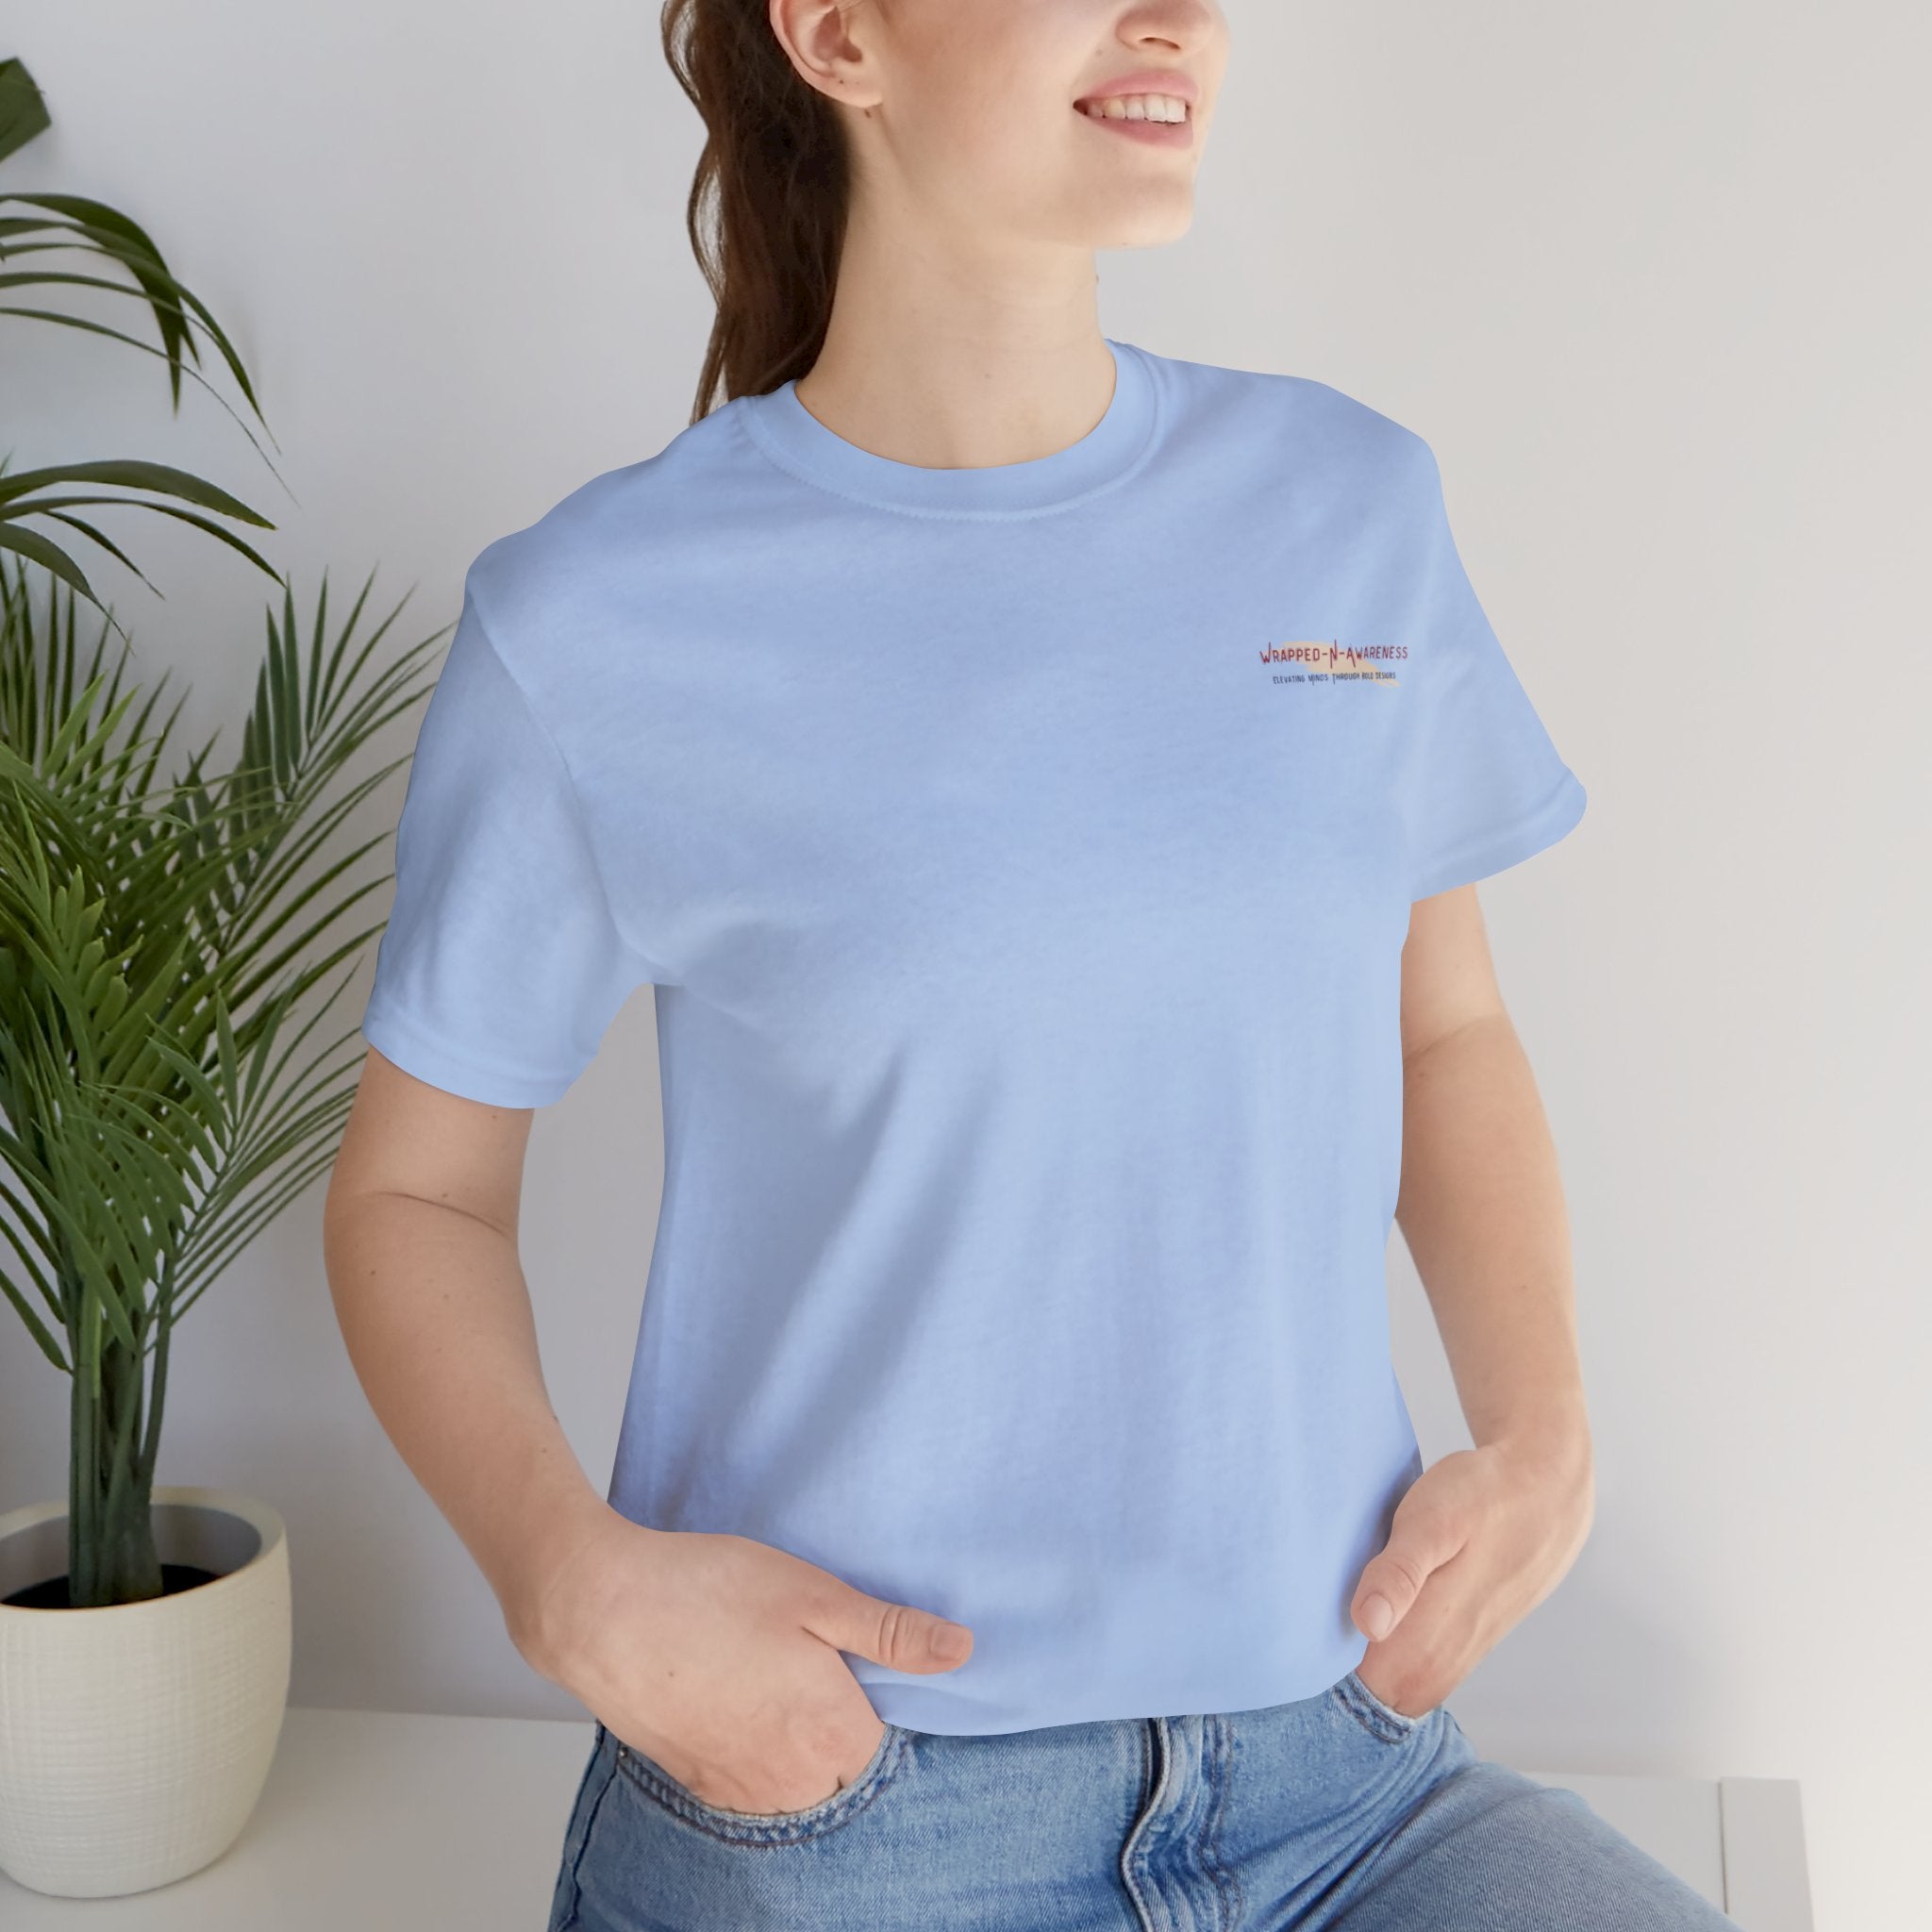 Progress Over Perfection Tee - Bella+Canvas 3001 Yellow Airlume Cotton Bella+Canvas 3001 Crew Neckline Jersey Short Sleeve Lightweight Fabric Mental Health Support Retail Fit Tear-away Label Tee Unisex Tee T-Shirt 3449782615371319328_2048 Printify